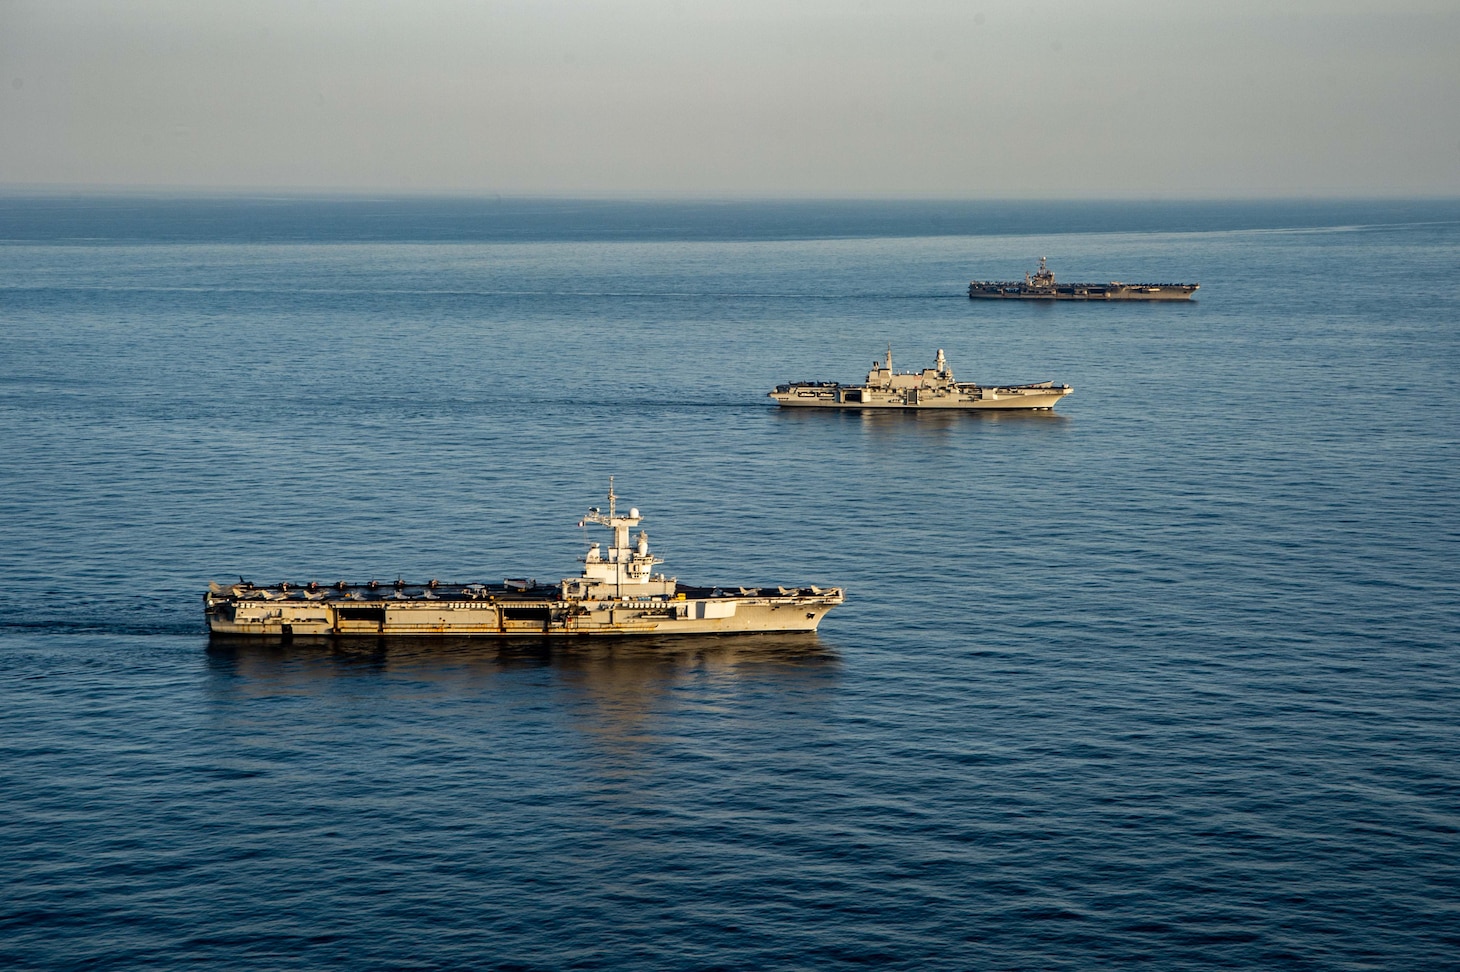 The Nimitz-class aircraft carrier USS Harry S. Truman (CVN 75), top, the Italian navy aircraft carrier ITS Cavour (C 550) and the French navy aircraft carrier Charles de Gaulle (R 91) transit the Mediterranean Sea in formation.